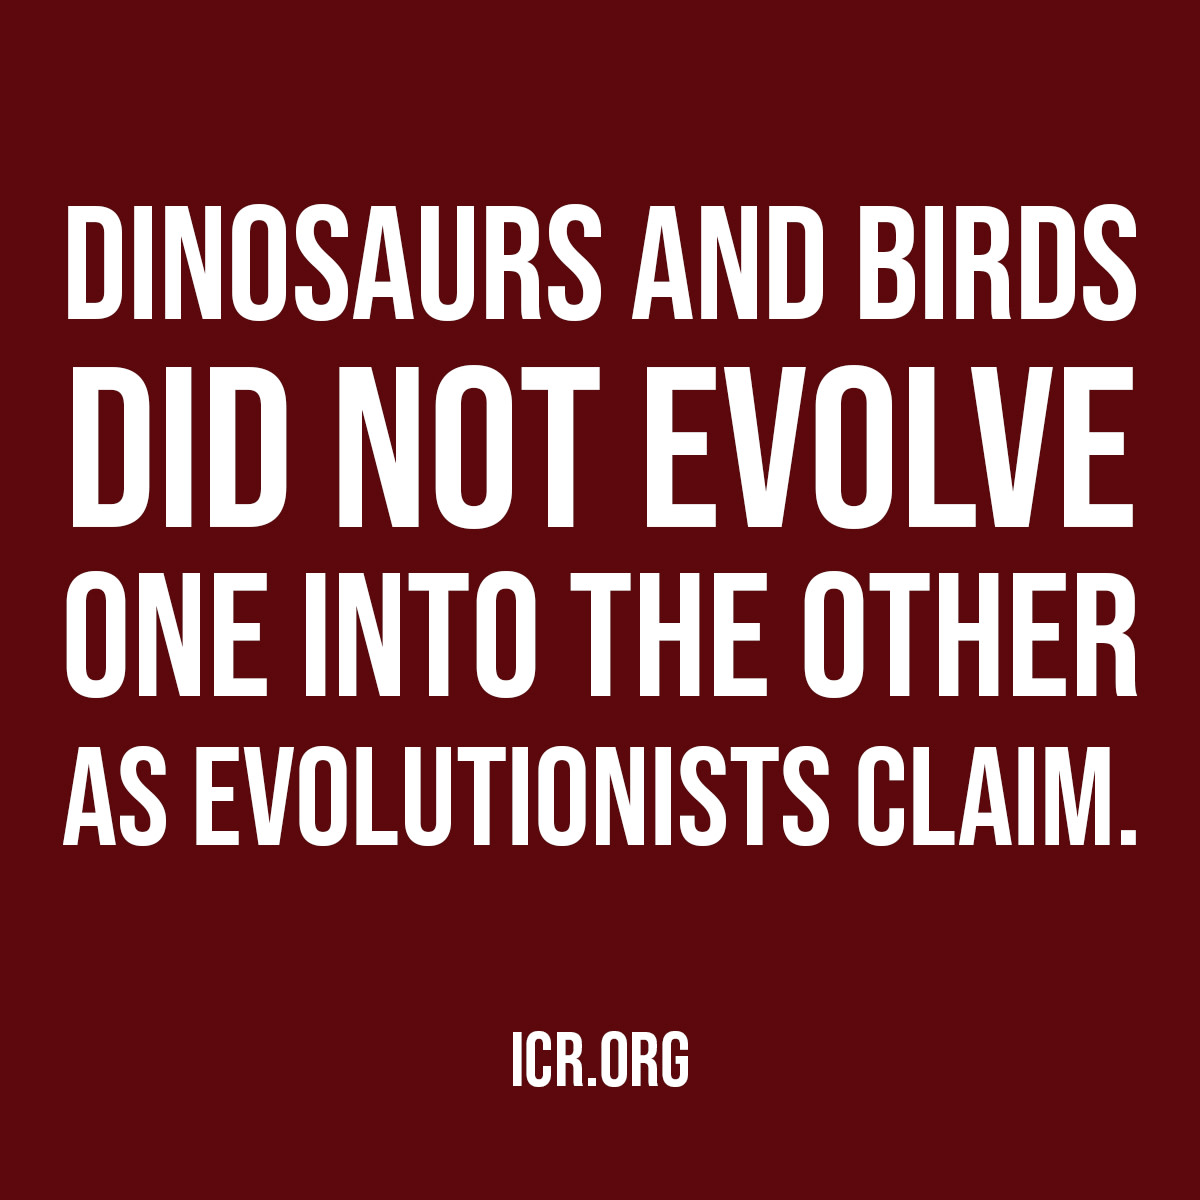 🦖 Dinosaurs and birds did not evolve one into the other as evolutionists claim. #QuoteOfTheDay #Dinosaurs